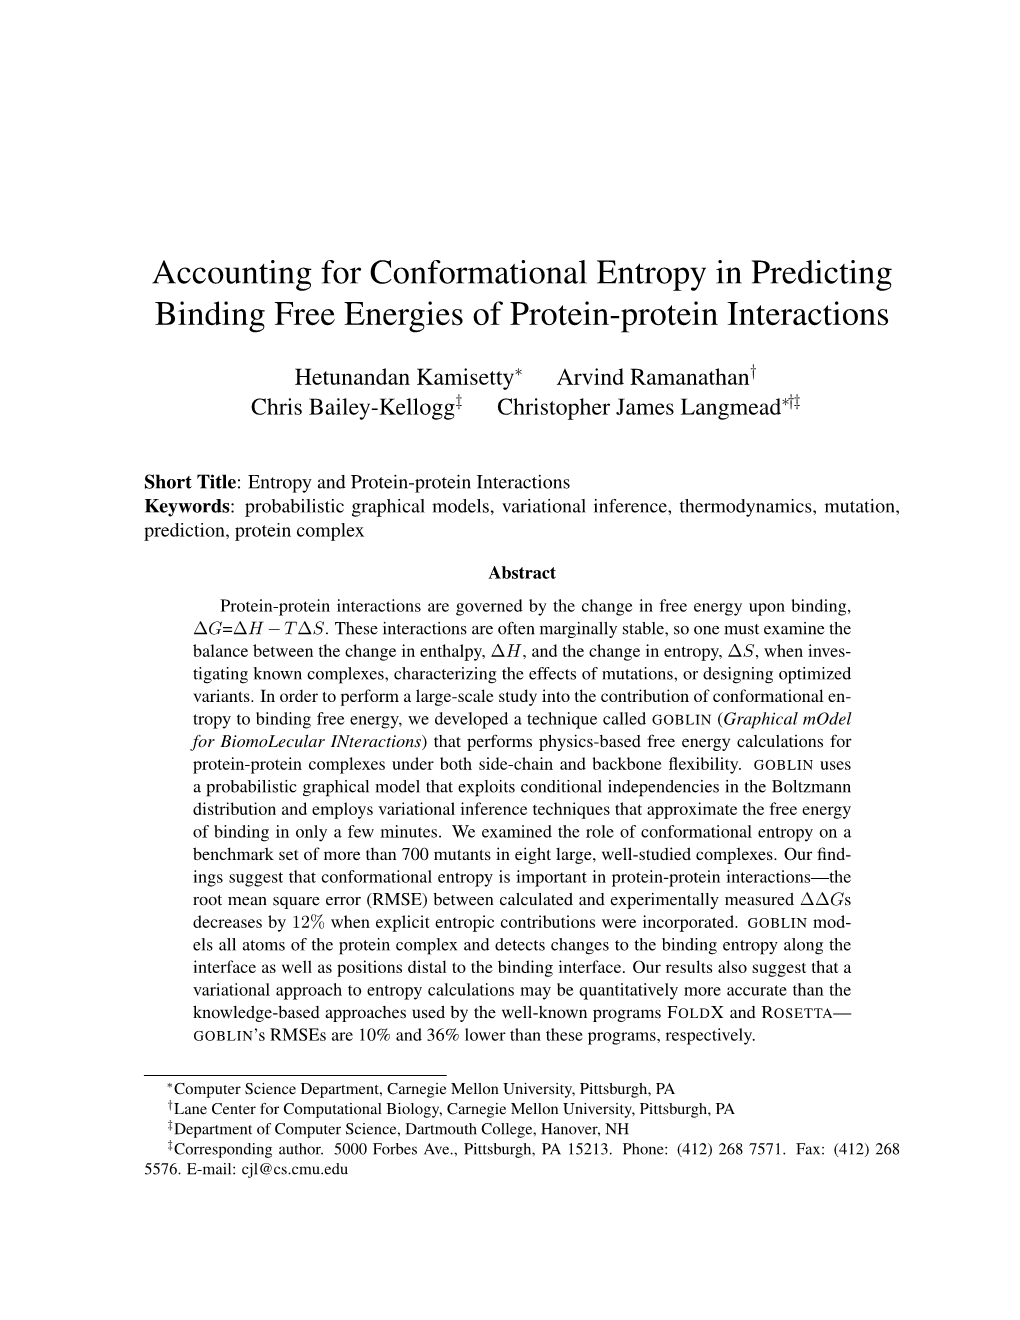 Accounting for Conformational Entropy in Predicting Binding Free Energies of Protein-Protein Interactions